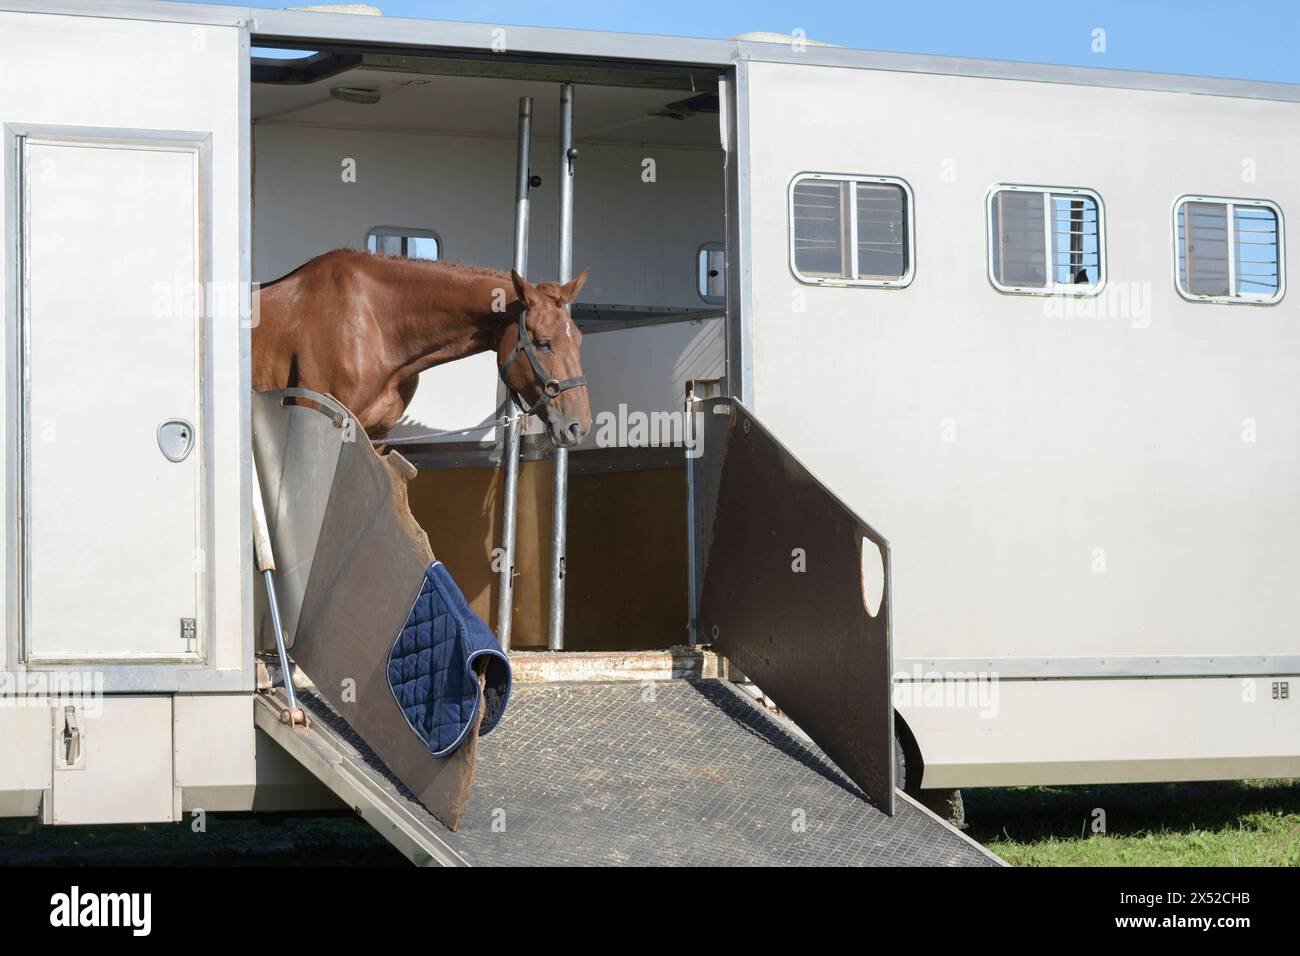 Sad brown horse in a large white horse trailer Stock Photo